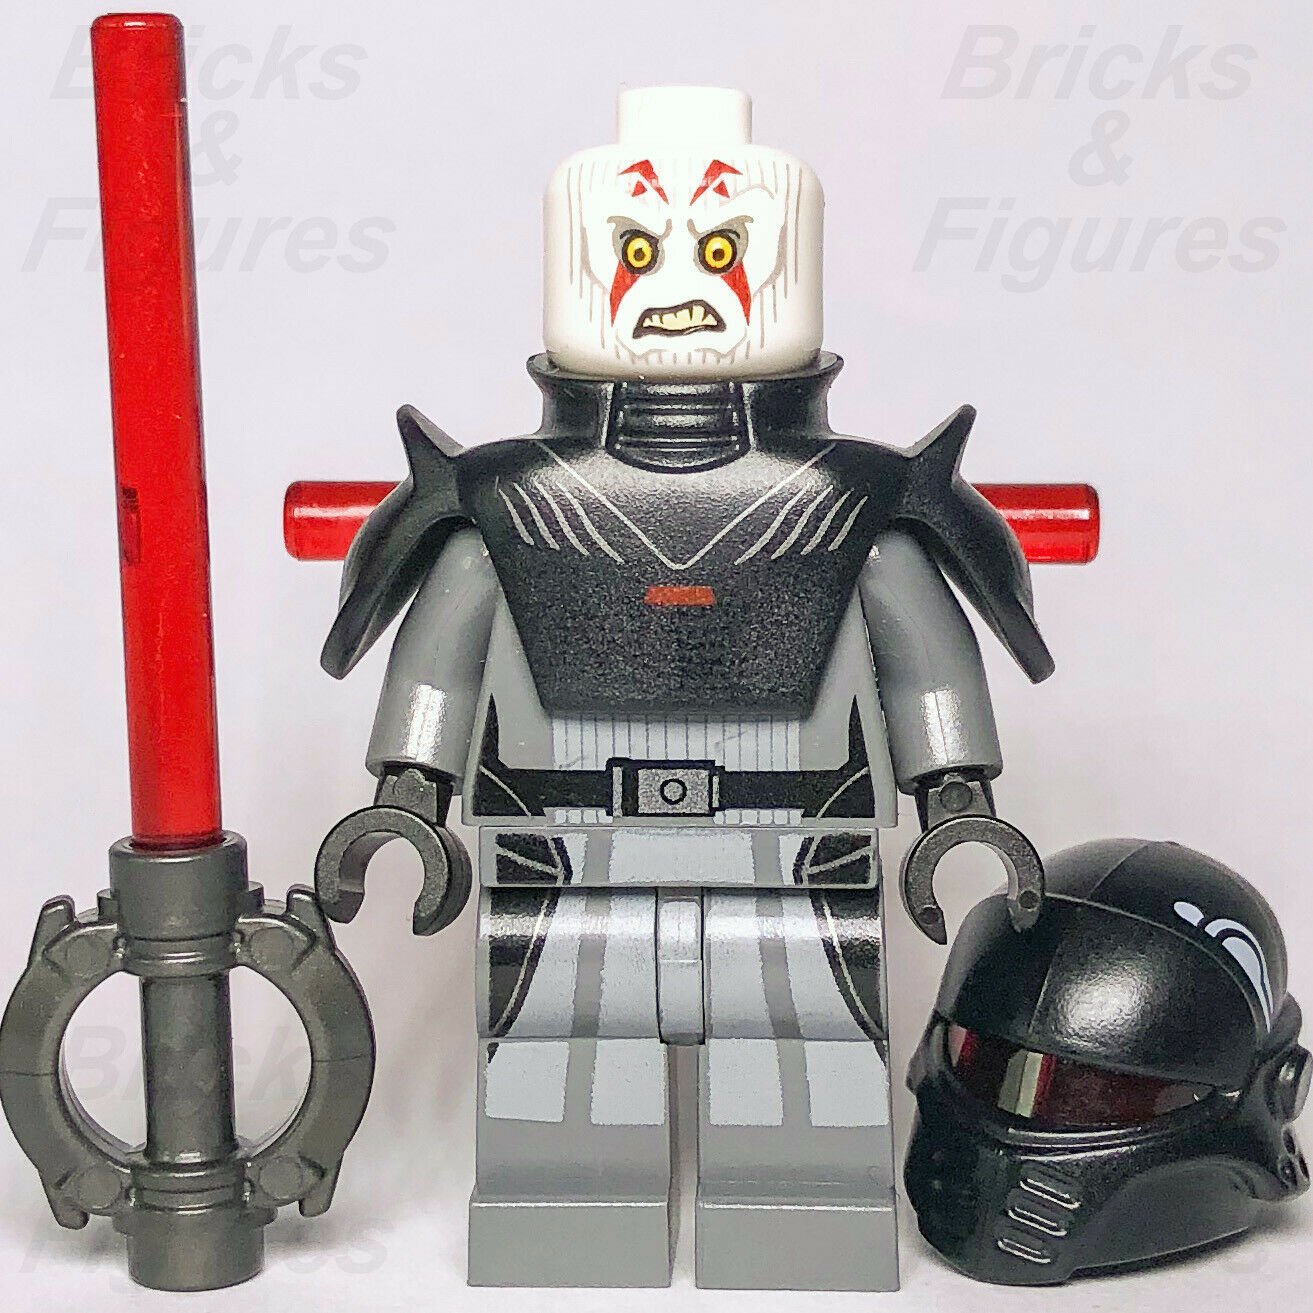 New Star Wars LEGO Imperial Grand Inquisitor Sith Rebels Minifigure 75082 - Bricks & Figures